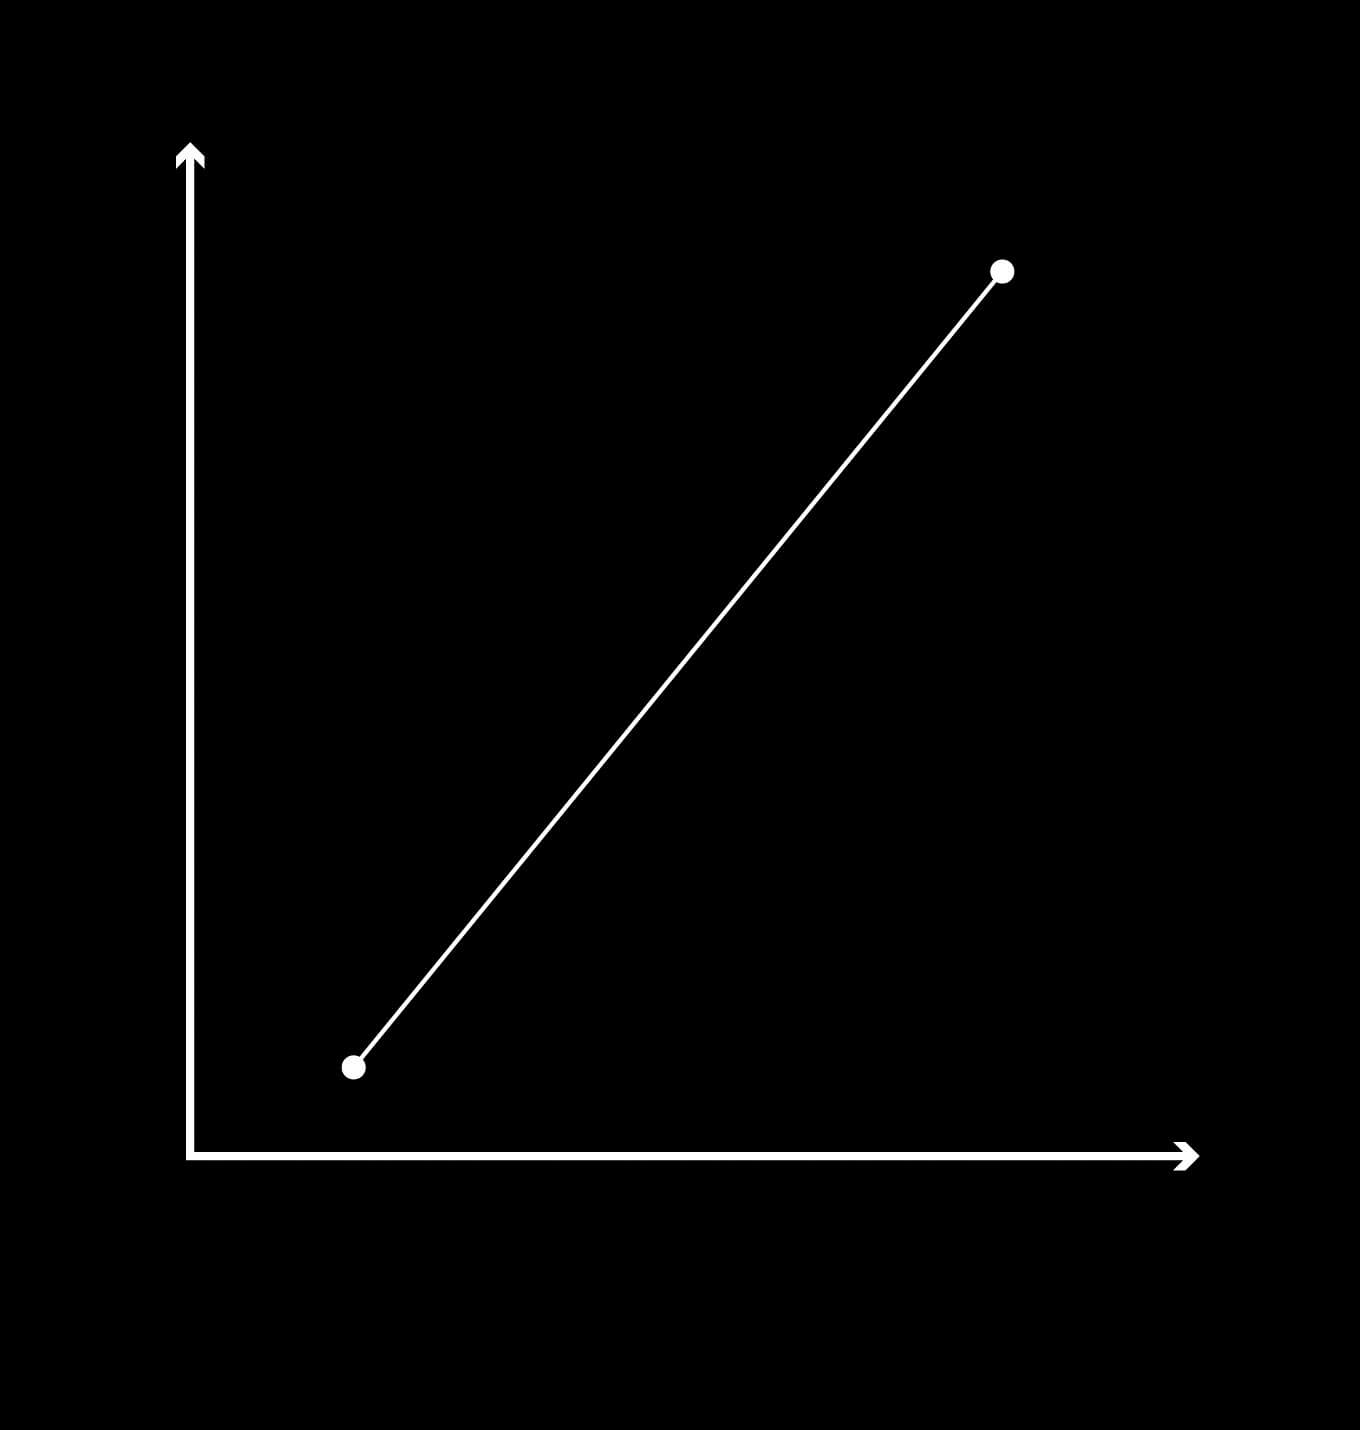 A line in a coordinate system